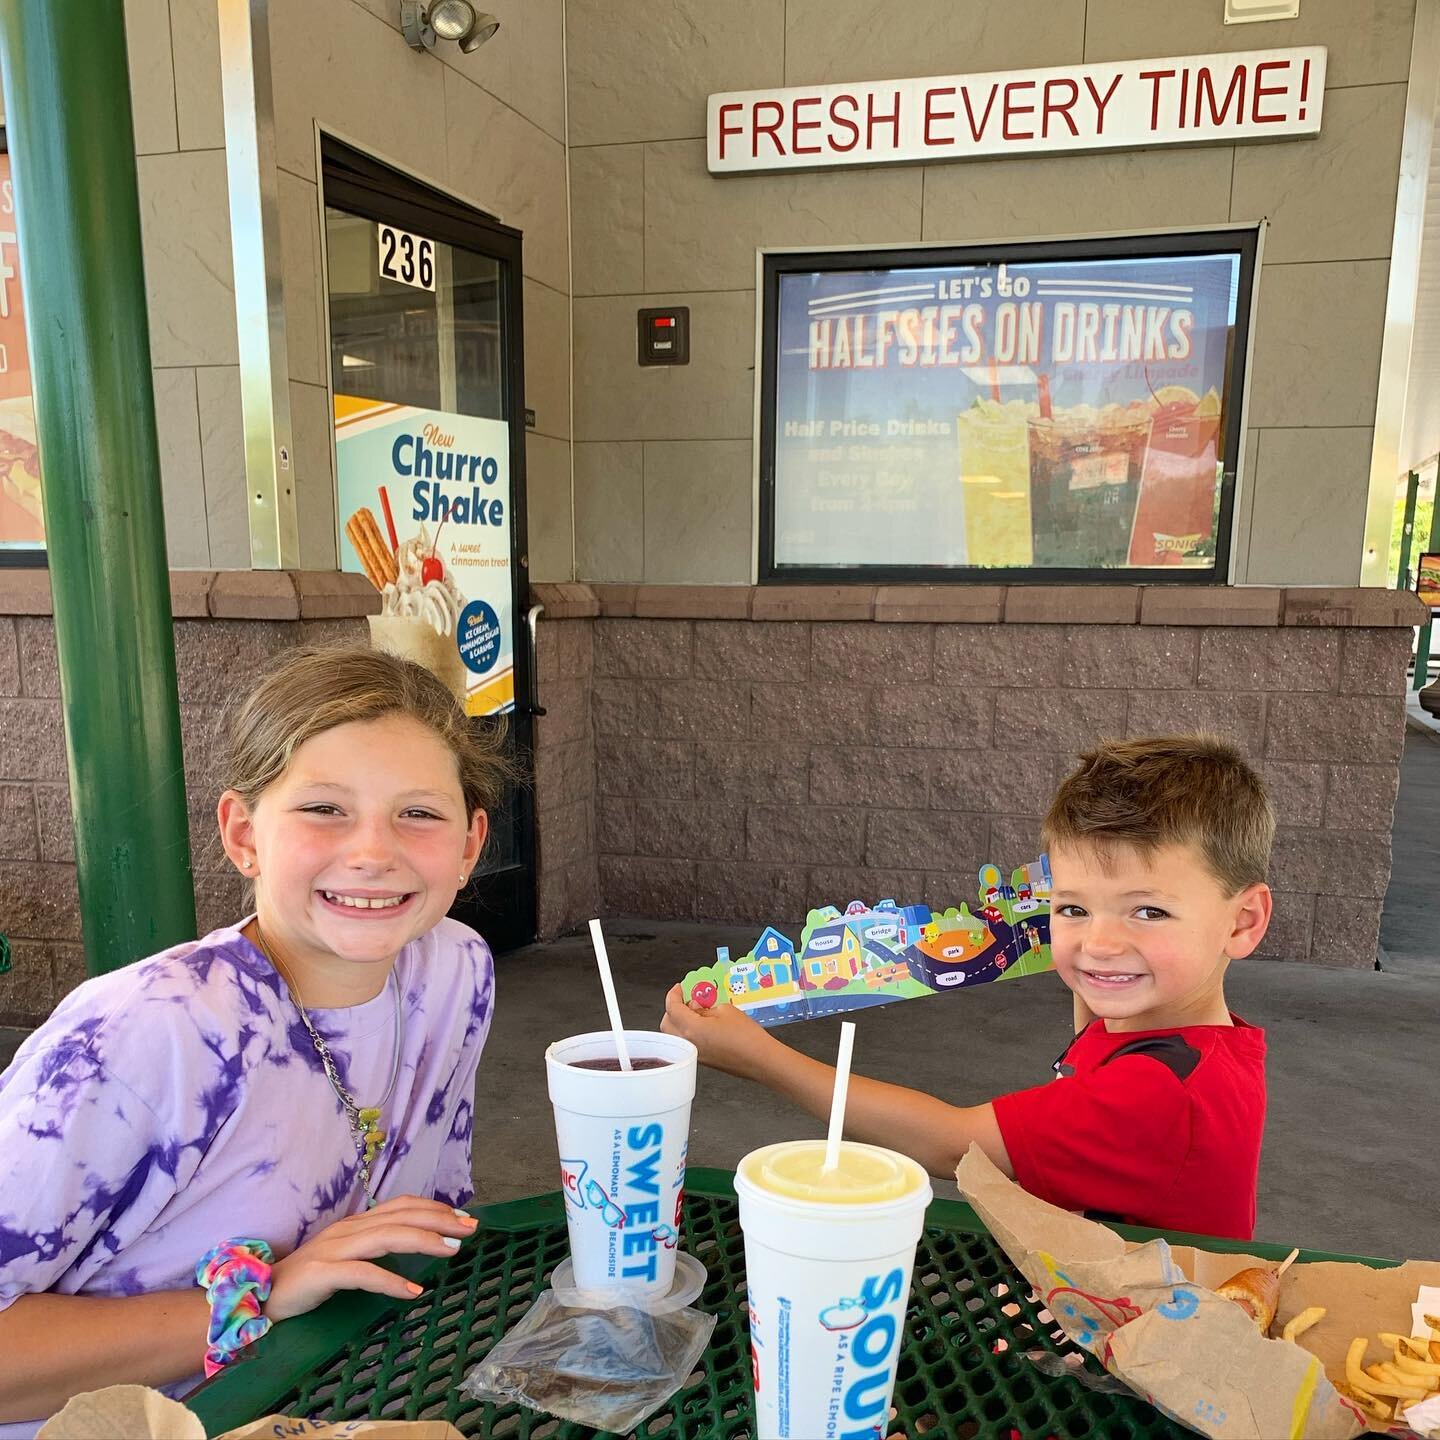 spent the day back to school shopping with my babes and crossed &lsquo;eat at Sonic&rsquo; off of Henry&rsquo;s summer bucket list ☀️ just love these two so much and soaking up all the time I have with them before school starts 💛